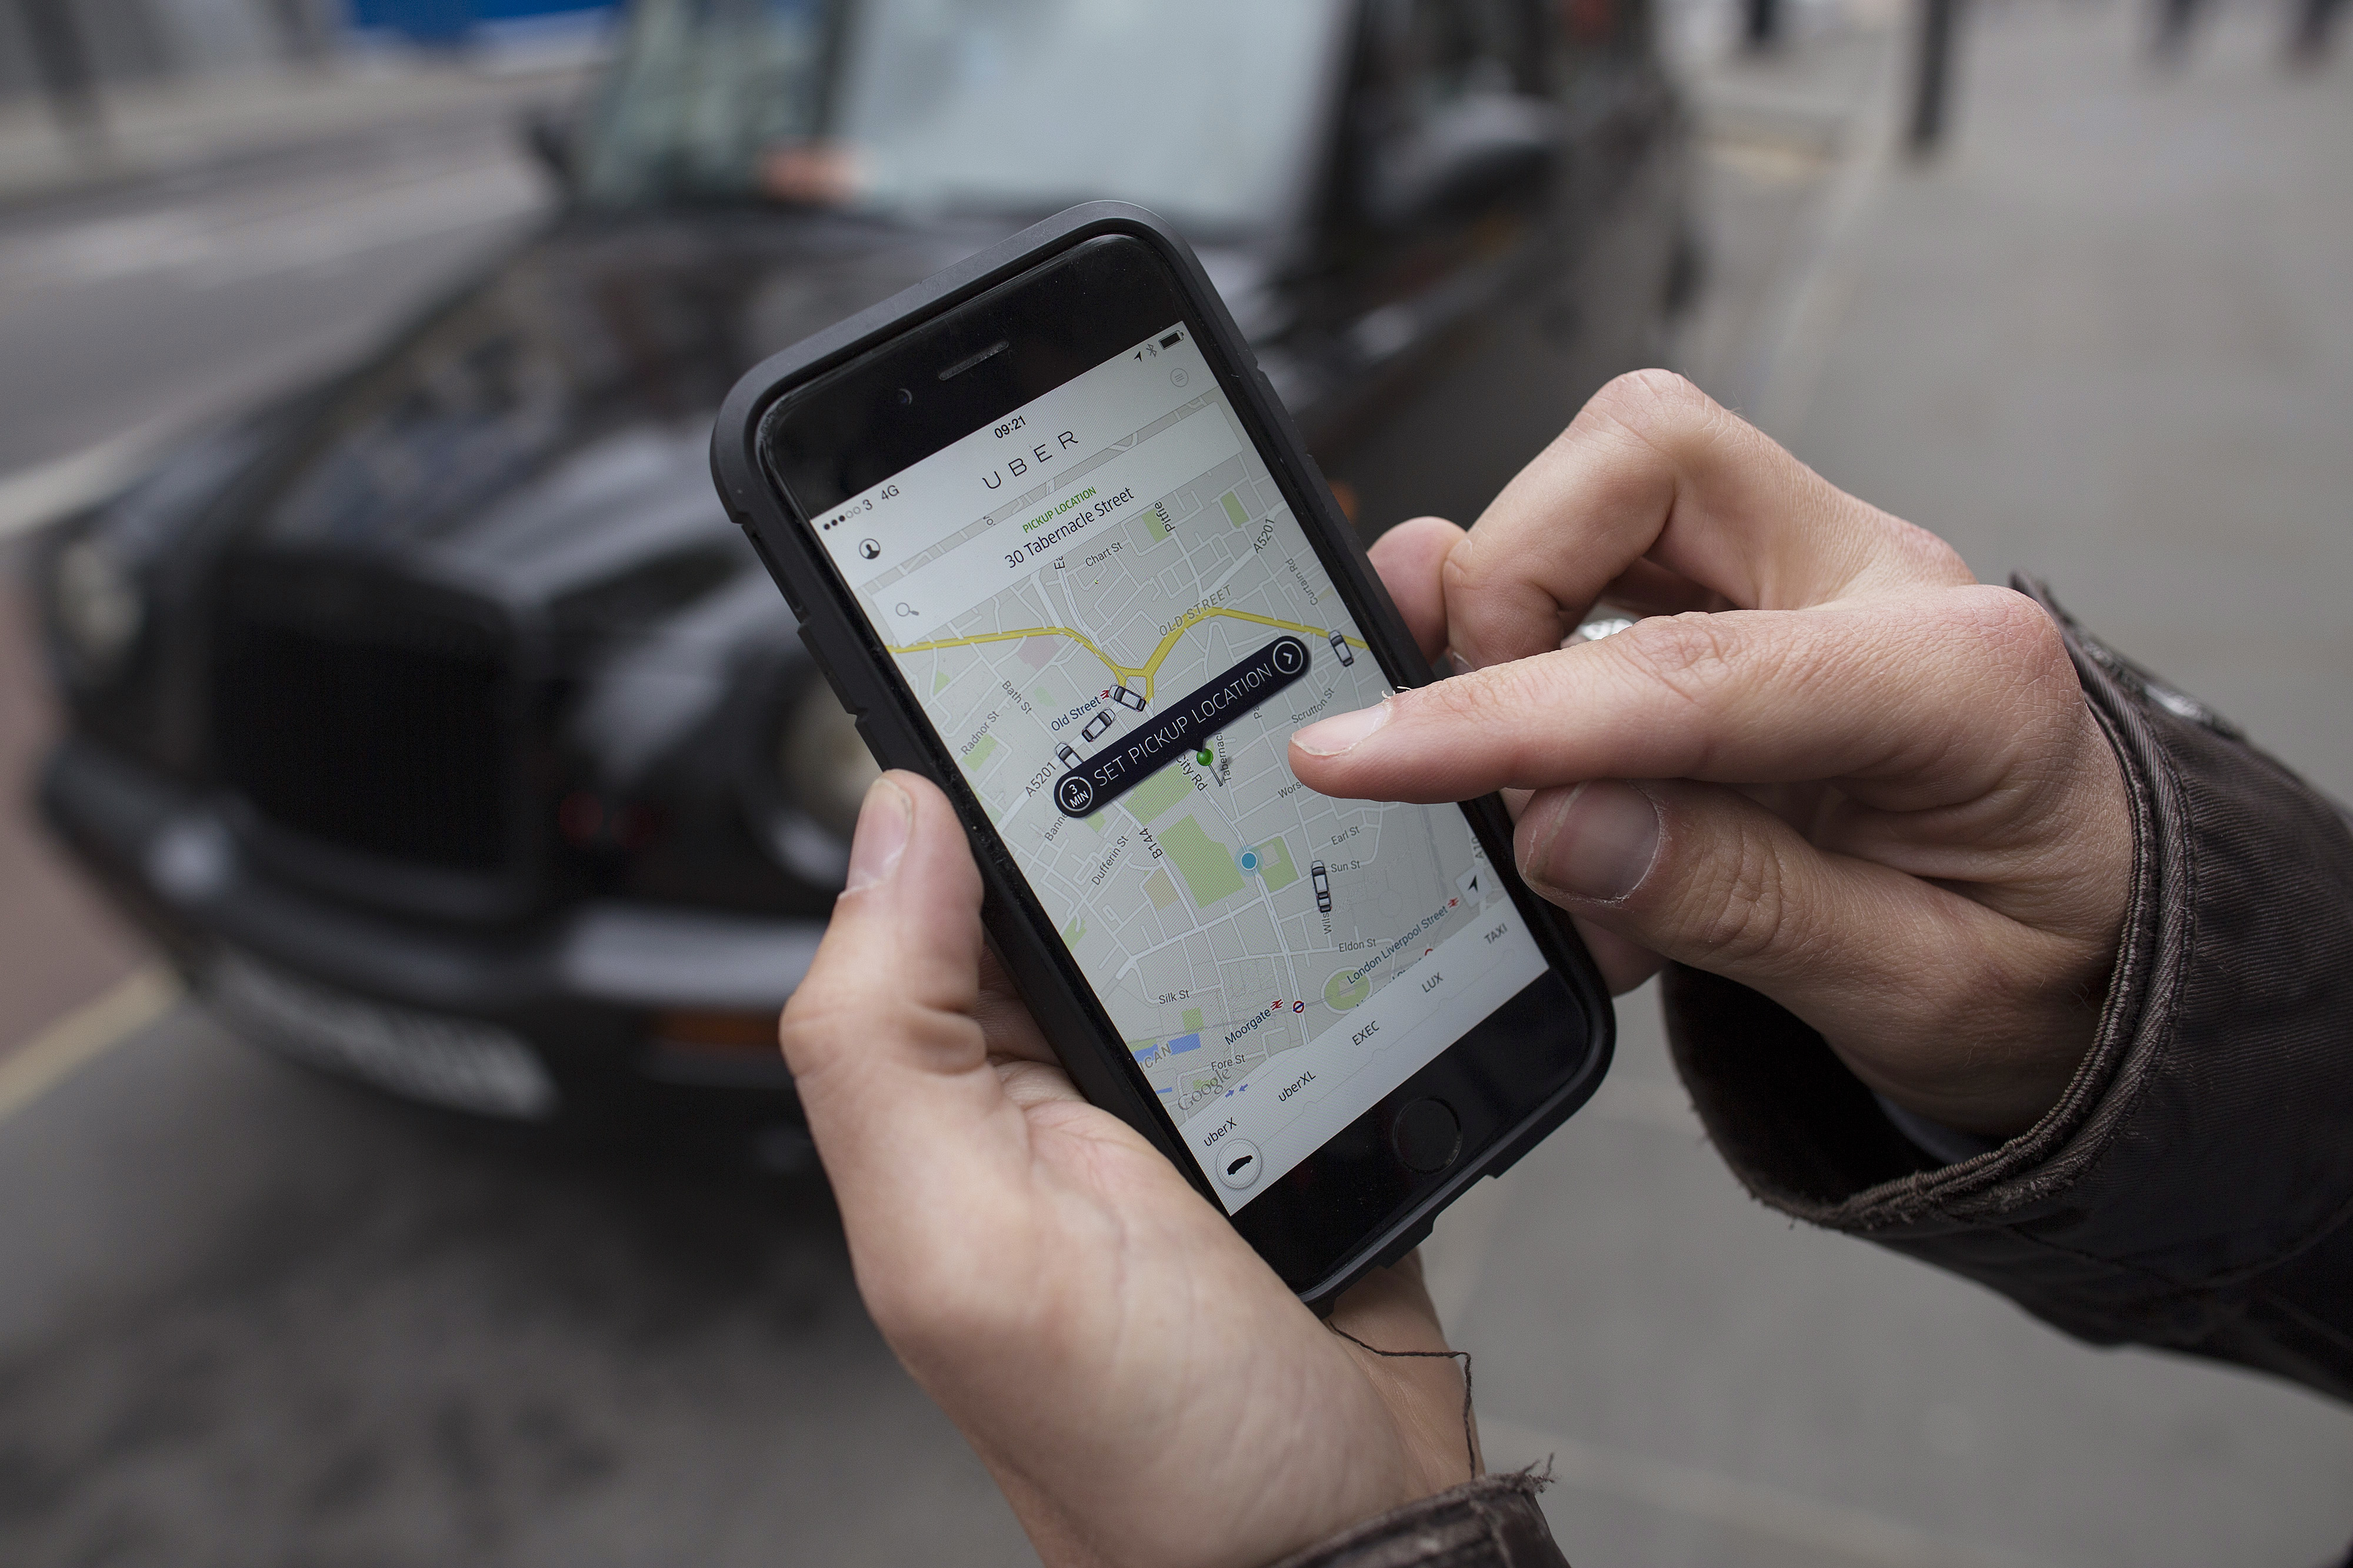 London Taxi Cabs As Uber Technologies Inc. Blitz Leads To Drop in Black Cab Recruits